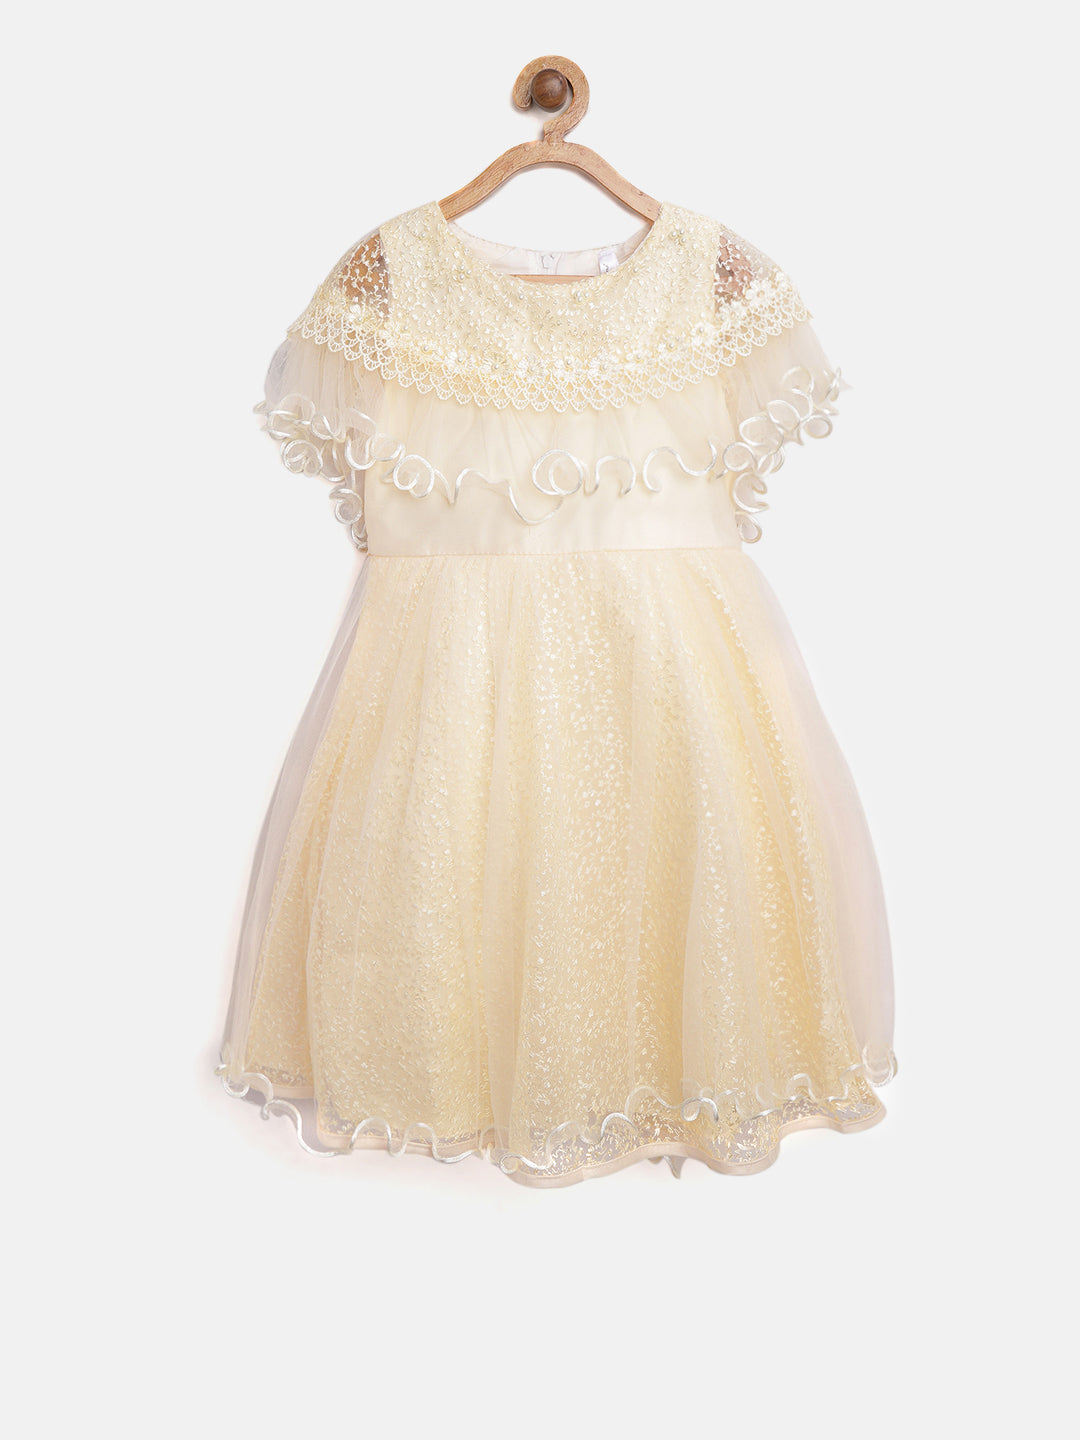 Gilr's White Pearls And Roses Embellished Party Dress With Shrug - StyleStone Kid